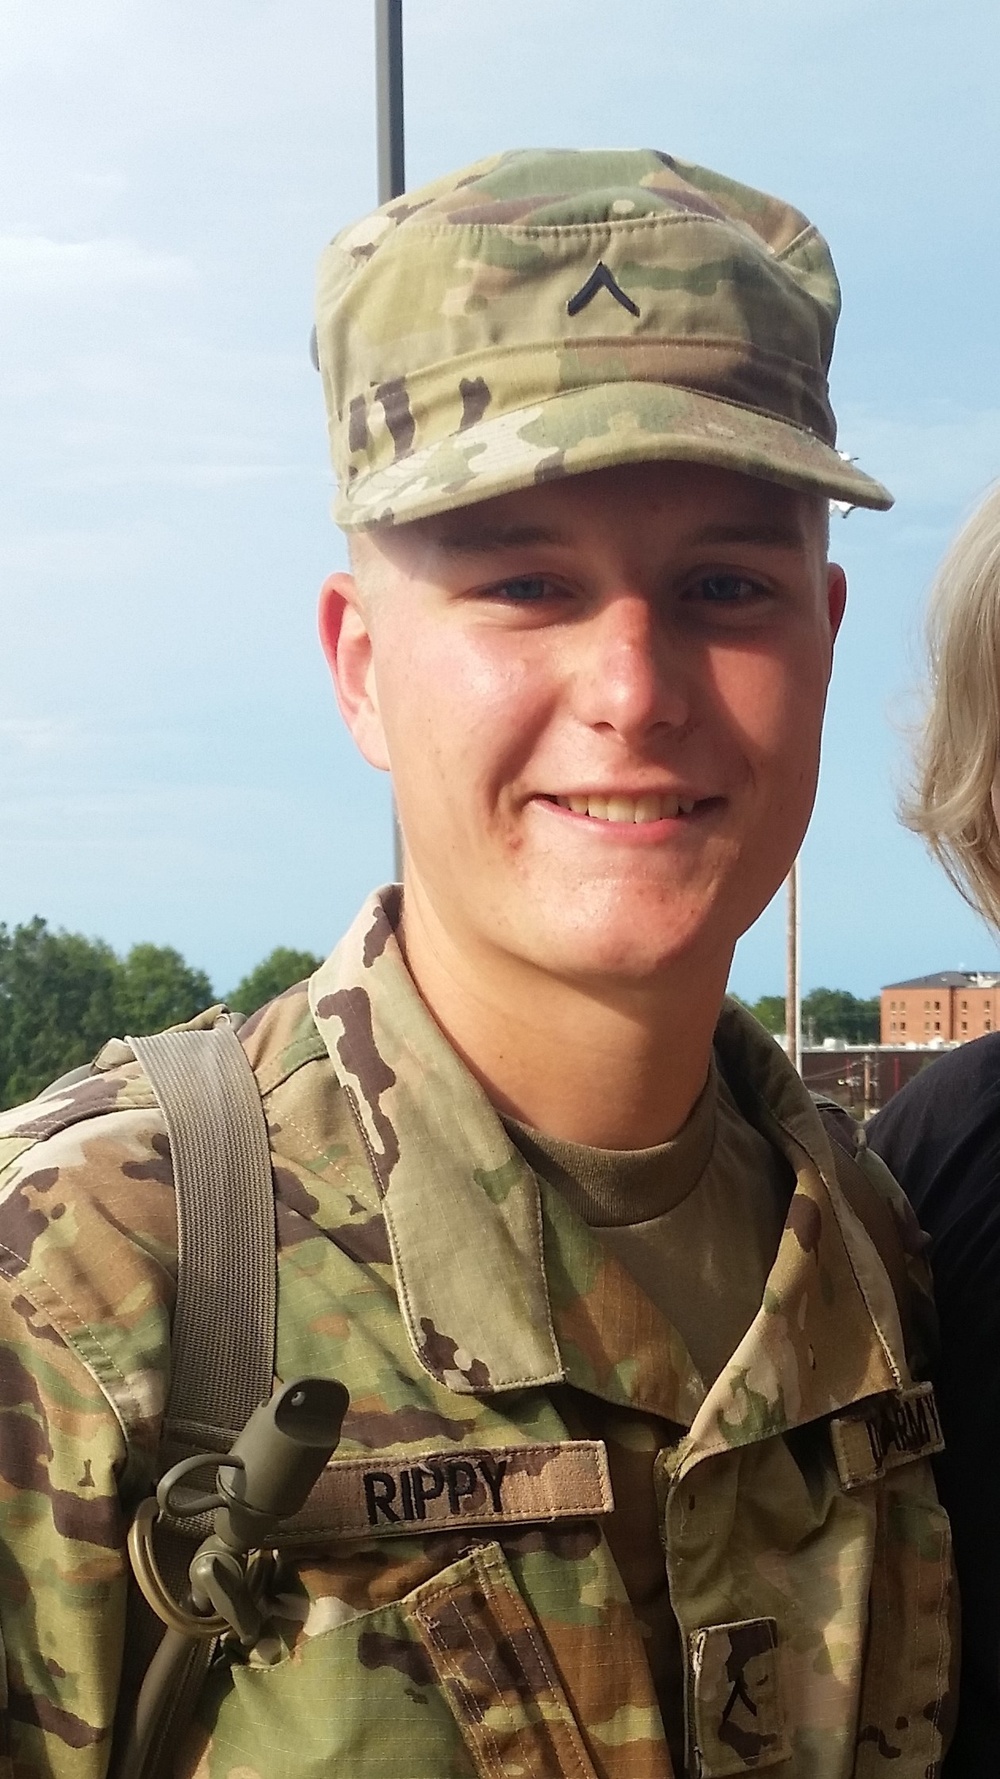 James D. Rippy enlists in Missouri National Guard